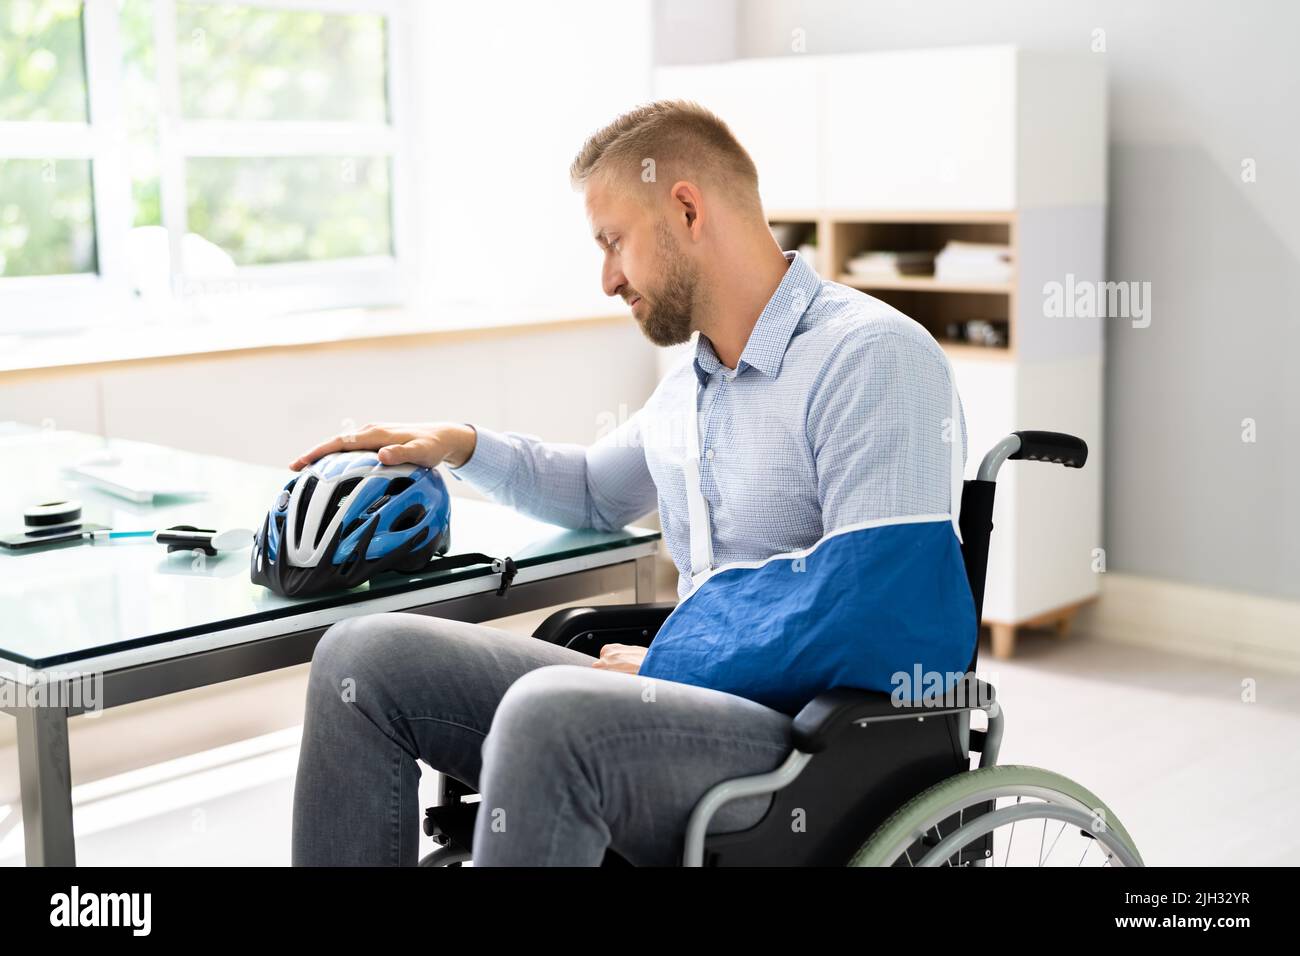 Motorcycle Accident Injury. Man With Arm Fracture. Hand Recovery Stock Photo